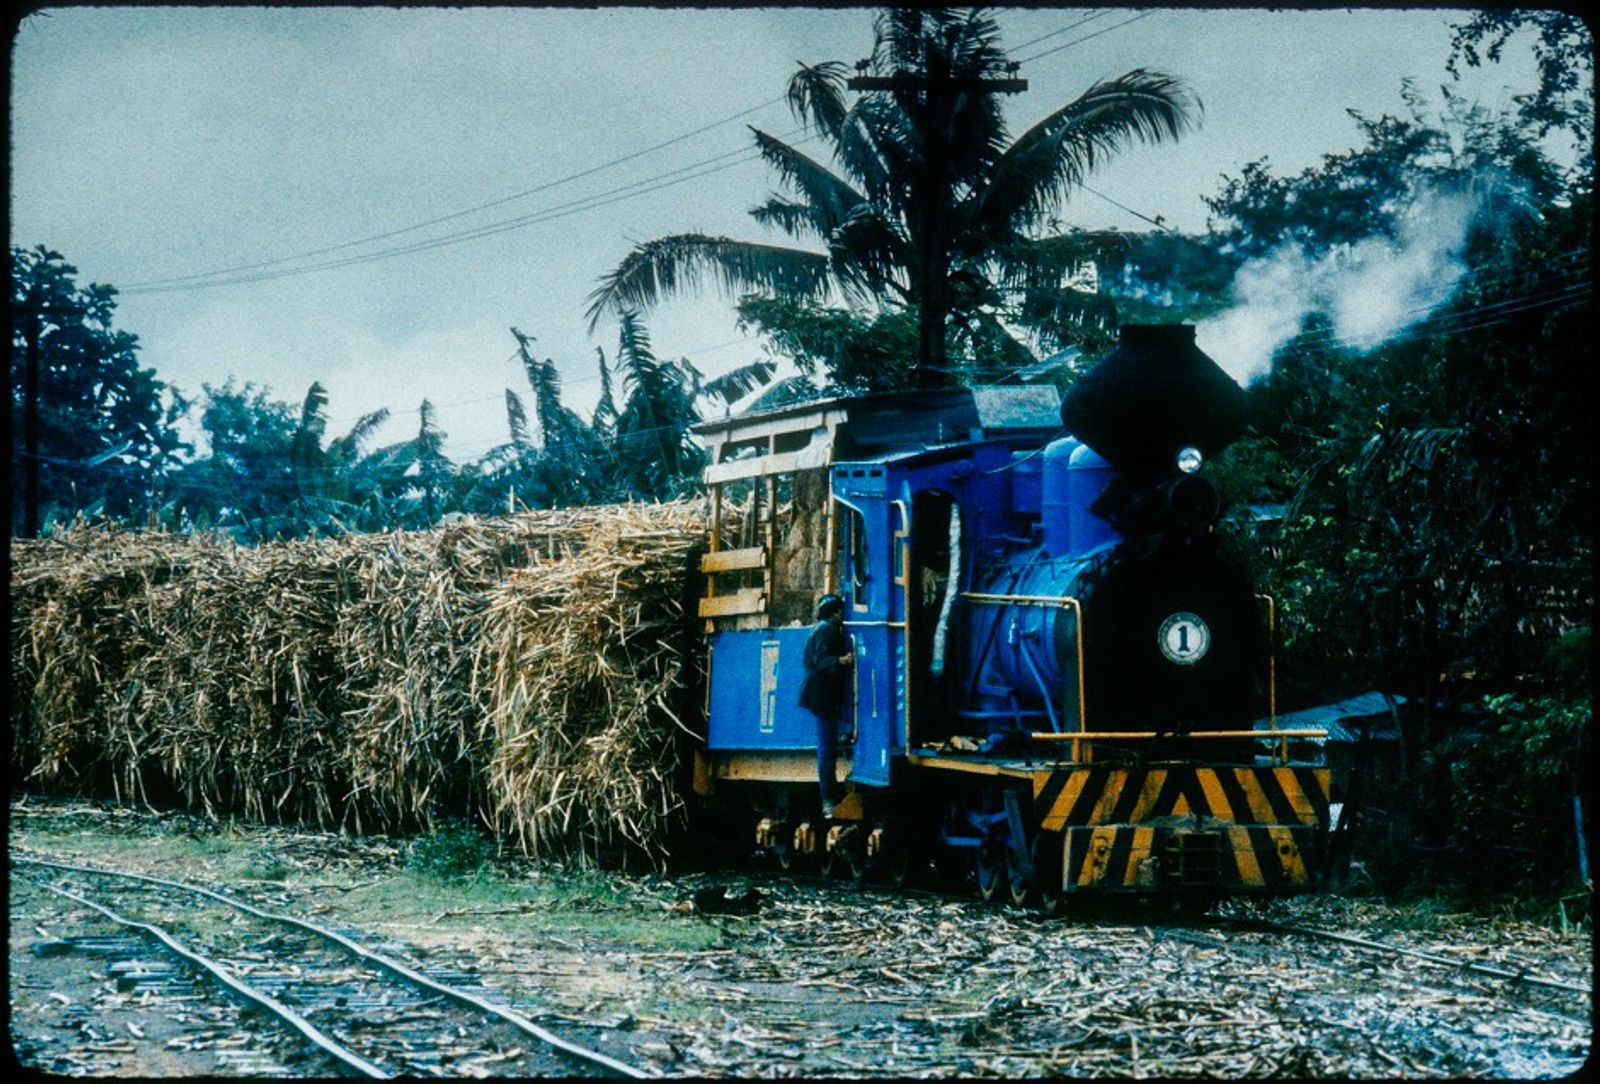 © Hartmut Schwarzbach - Image from the The Steam Trains of Hawaiian Philippine Sugar Company  photography project